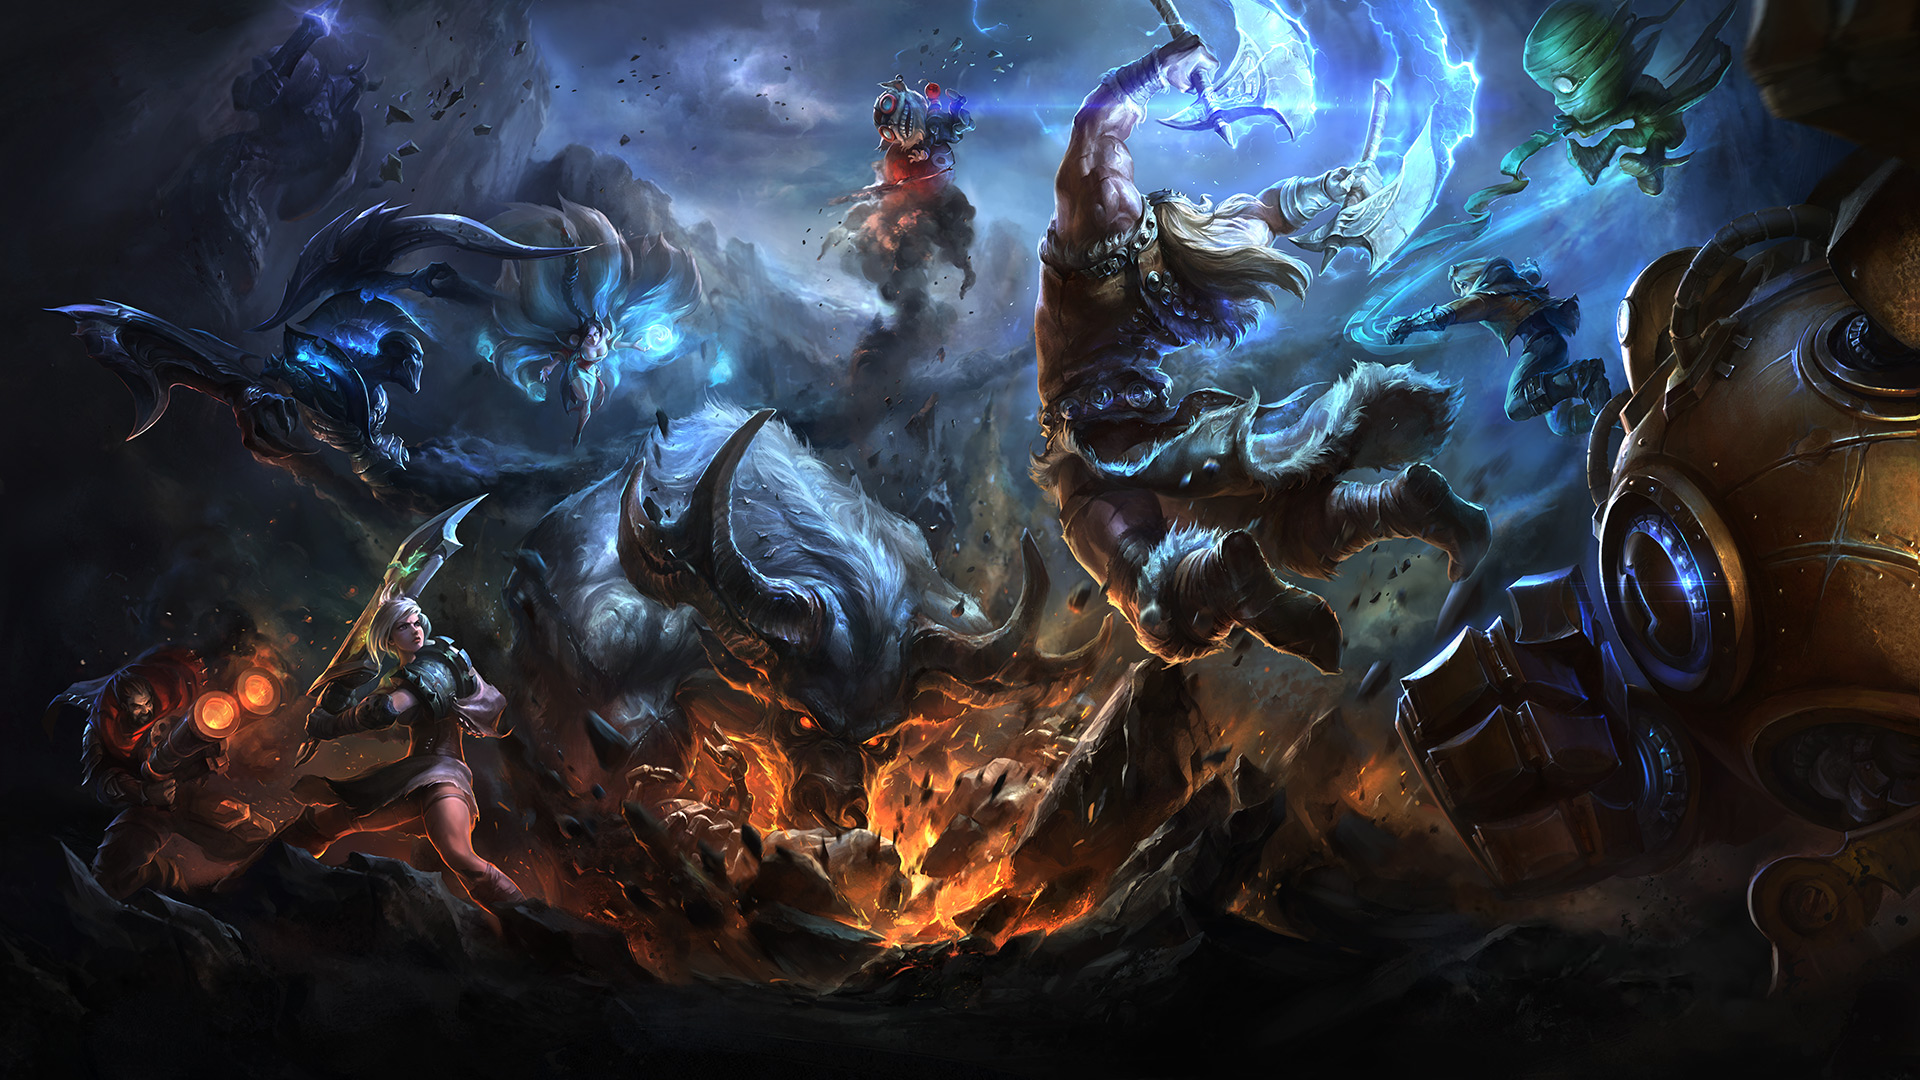 Your Shop has historically occurred around 5 - 6 times a year in League of Legends.